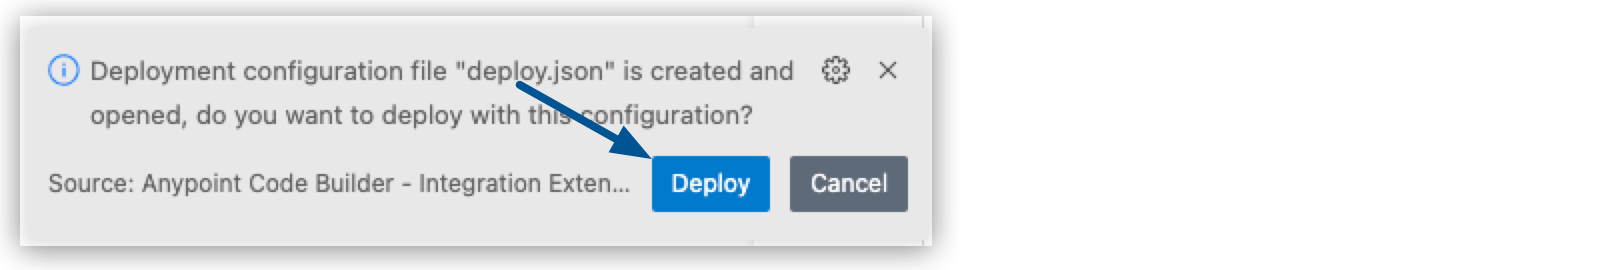 Deployment configuration file created pop-up message